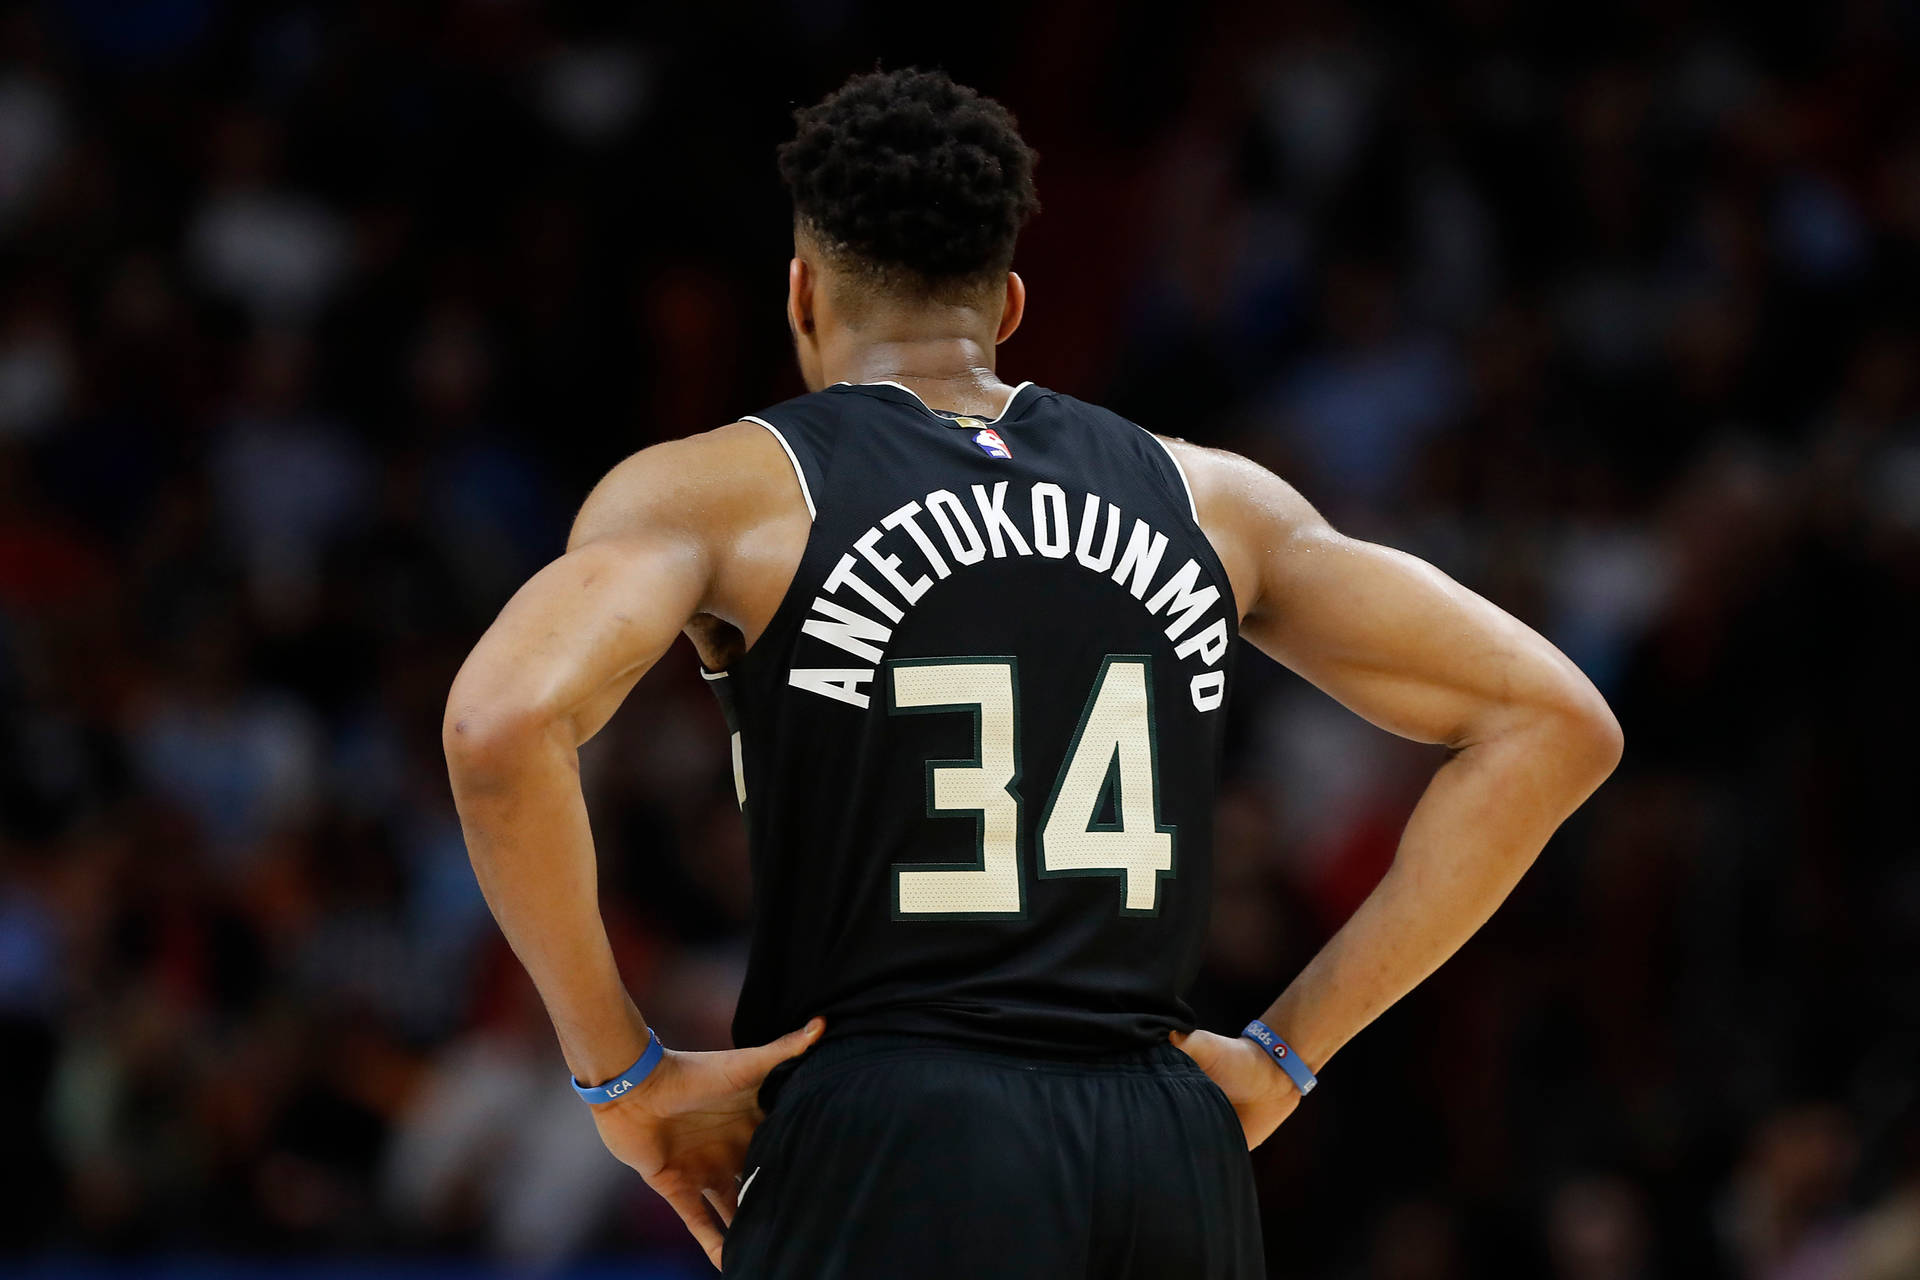 Giannis Antetokounmpo Jersey Number 34